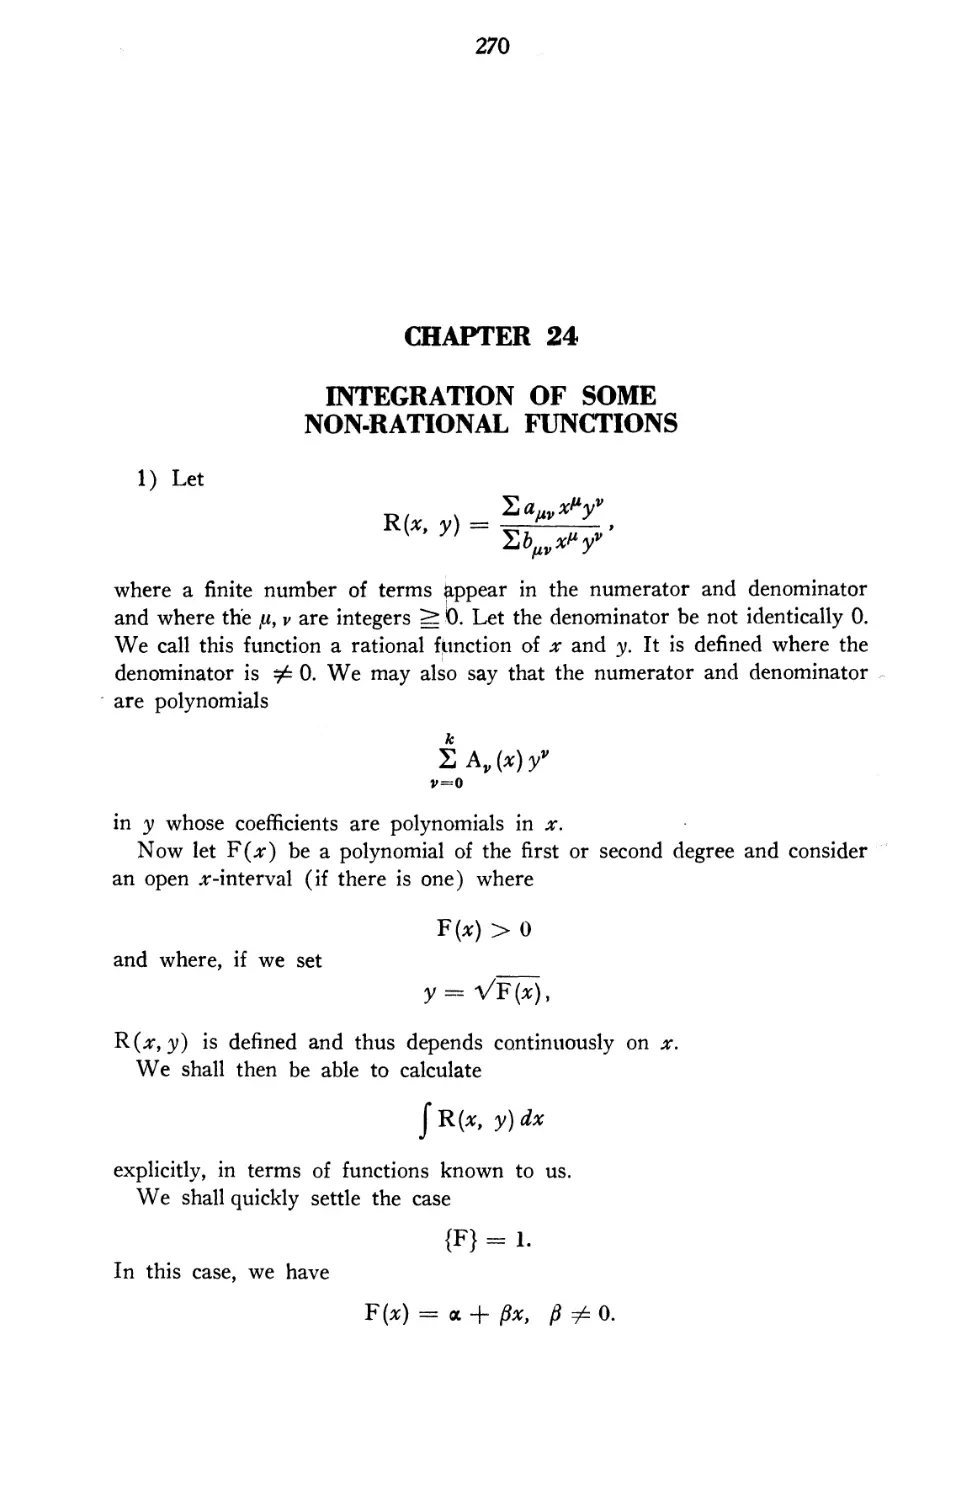 Chapter 24 The Integration of Certain Non-rational Functions